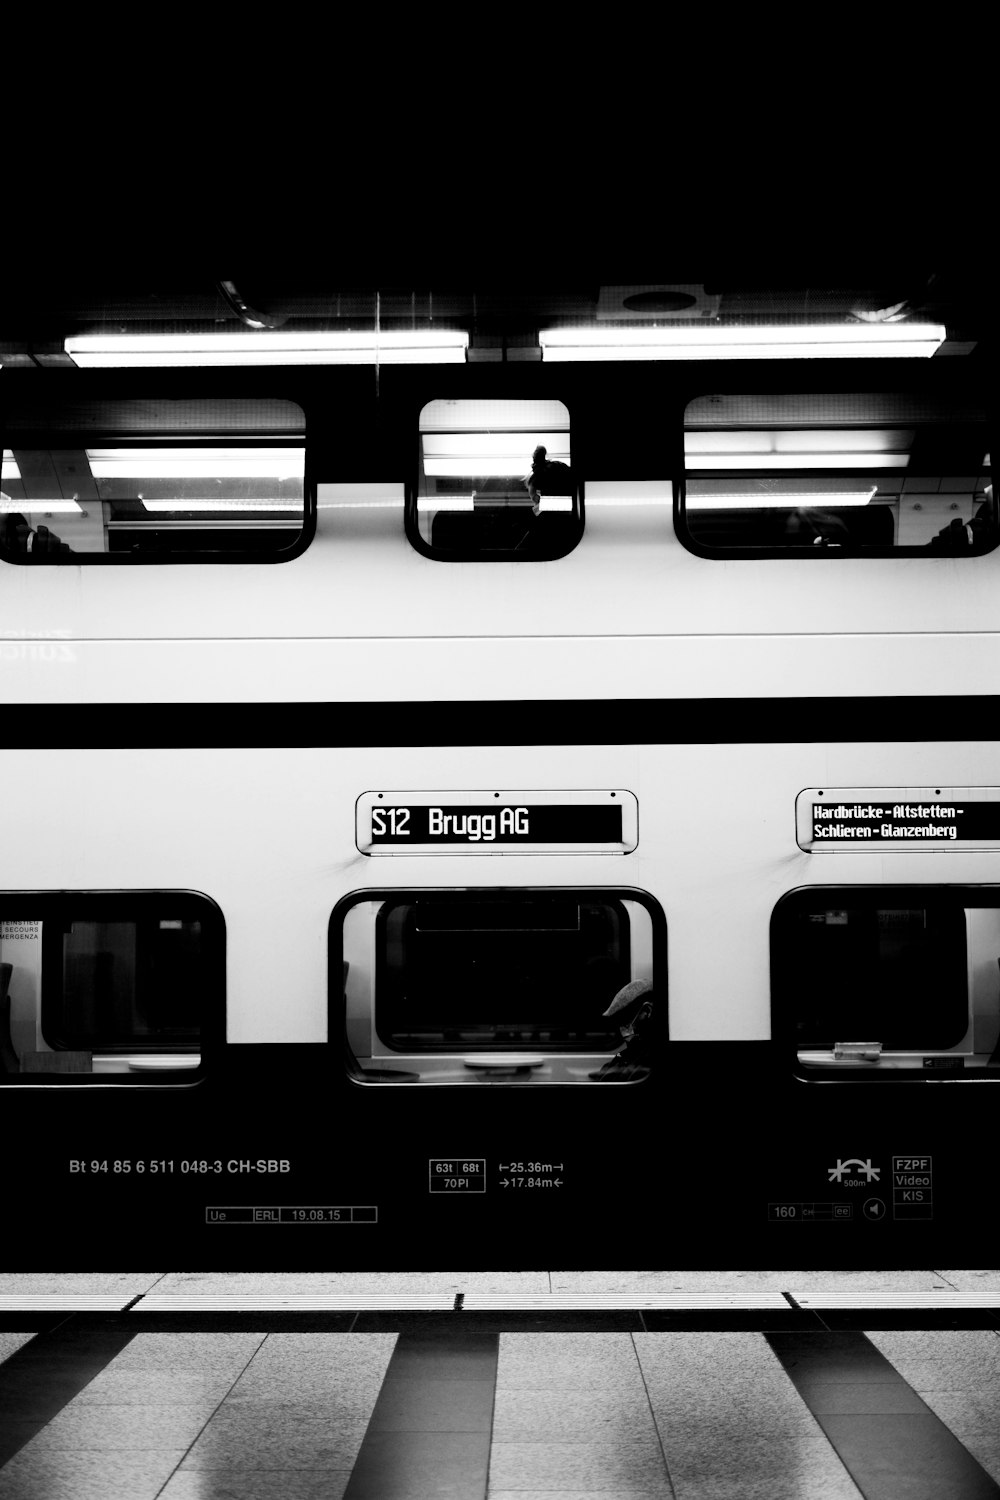 a black and white photo of a subway car